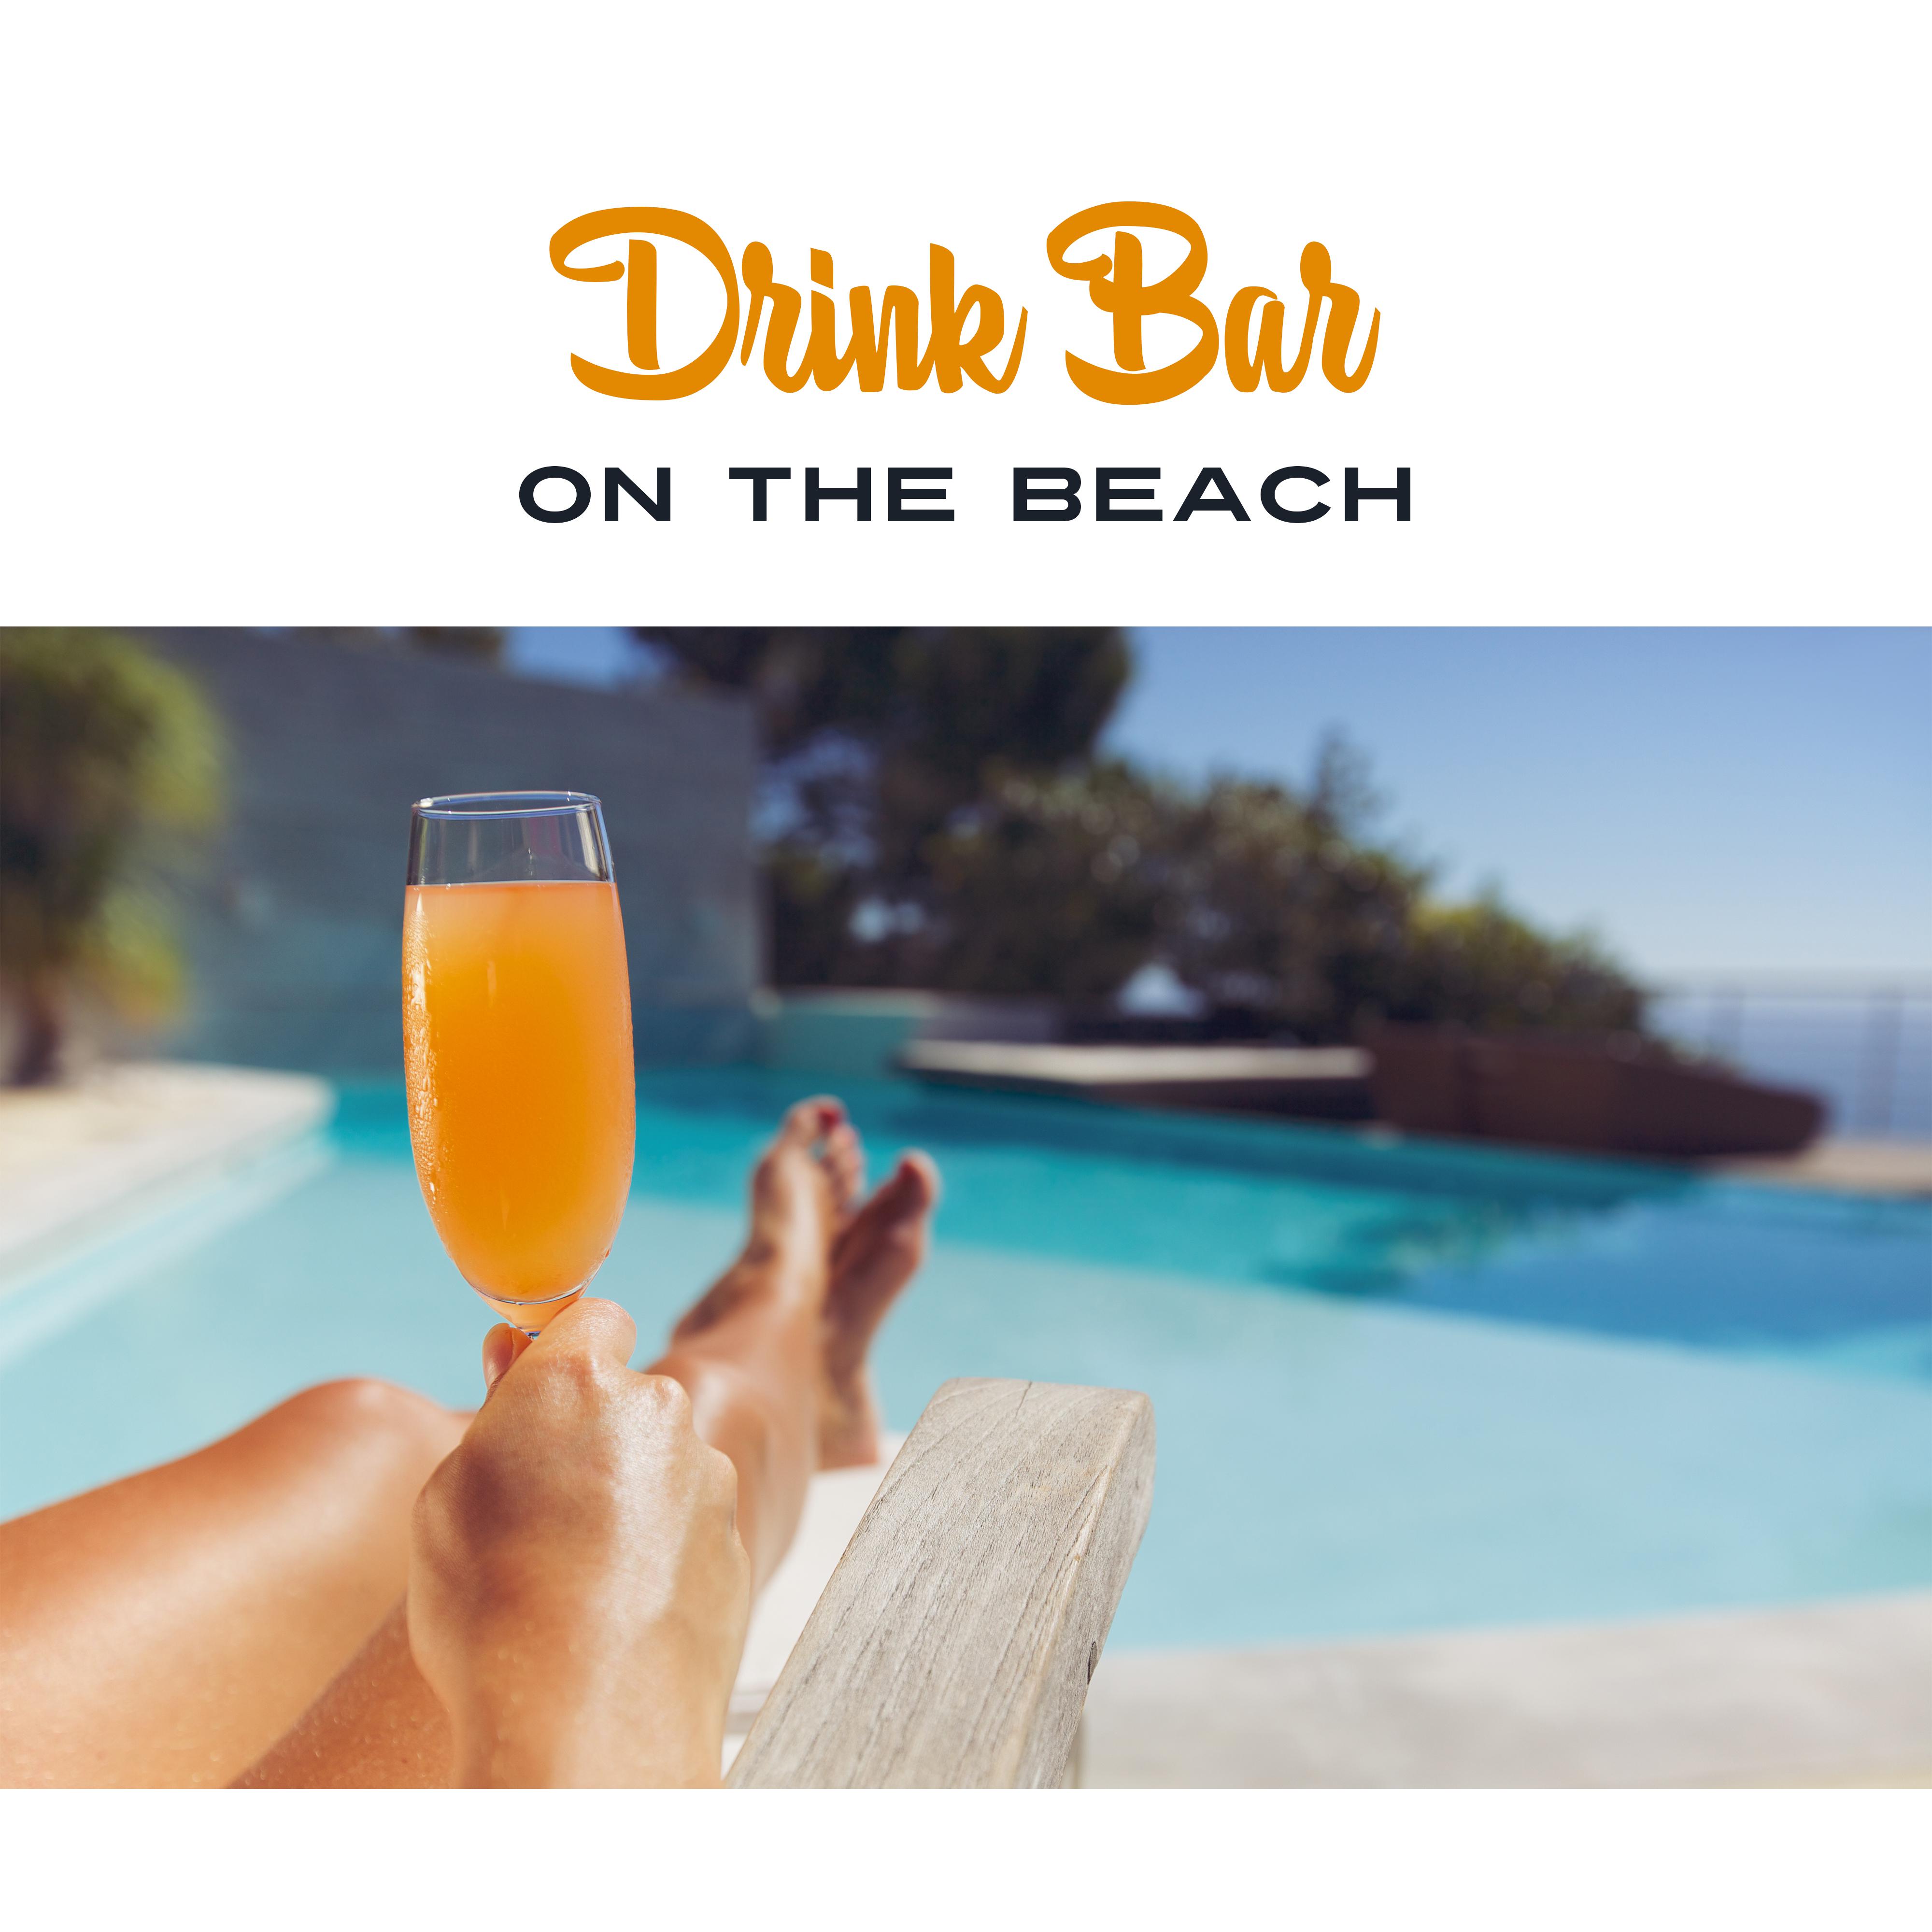 Drink Bar on the Beach – Cafe Chillout, Holiday Under Palms, Beach Chill, Sounds of Sea, Relaxing Music, Peaceful Mind, Holiday Chill Out Music